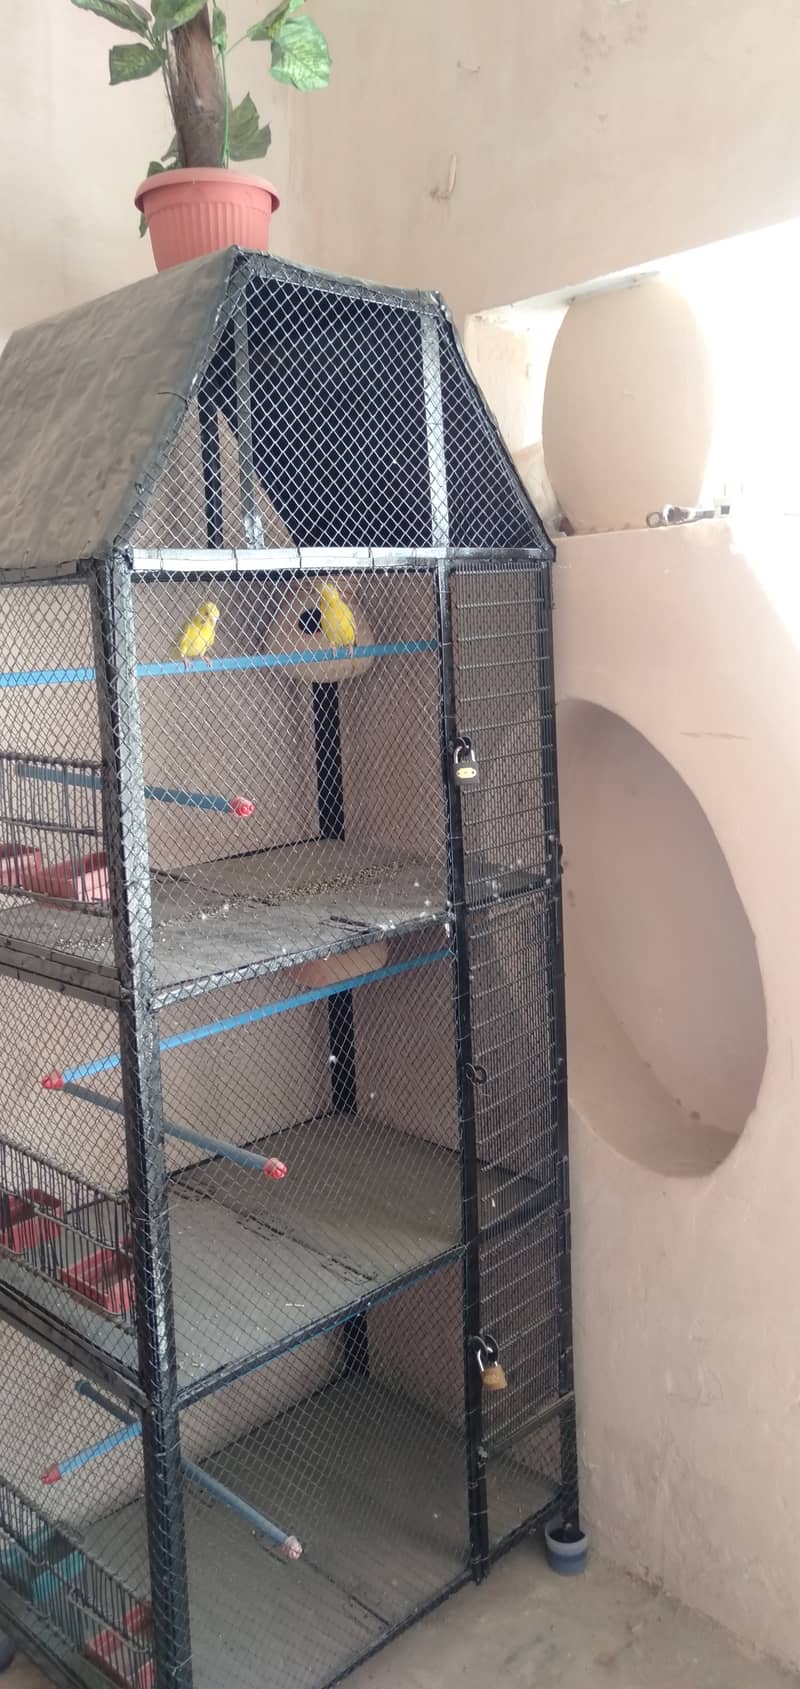 Parrot cage 3